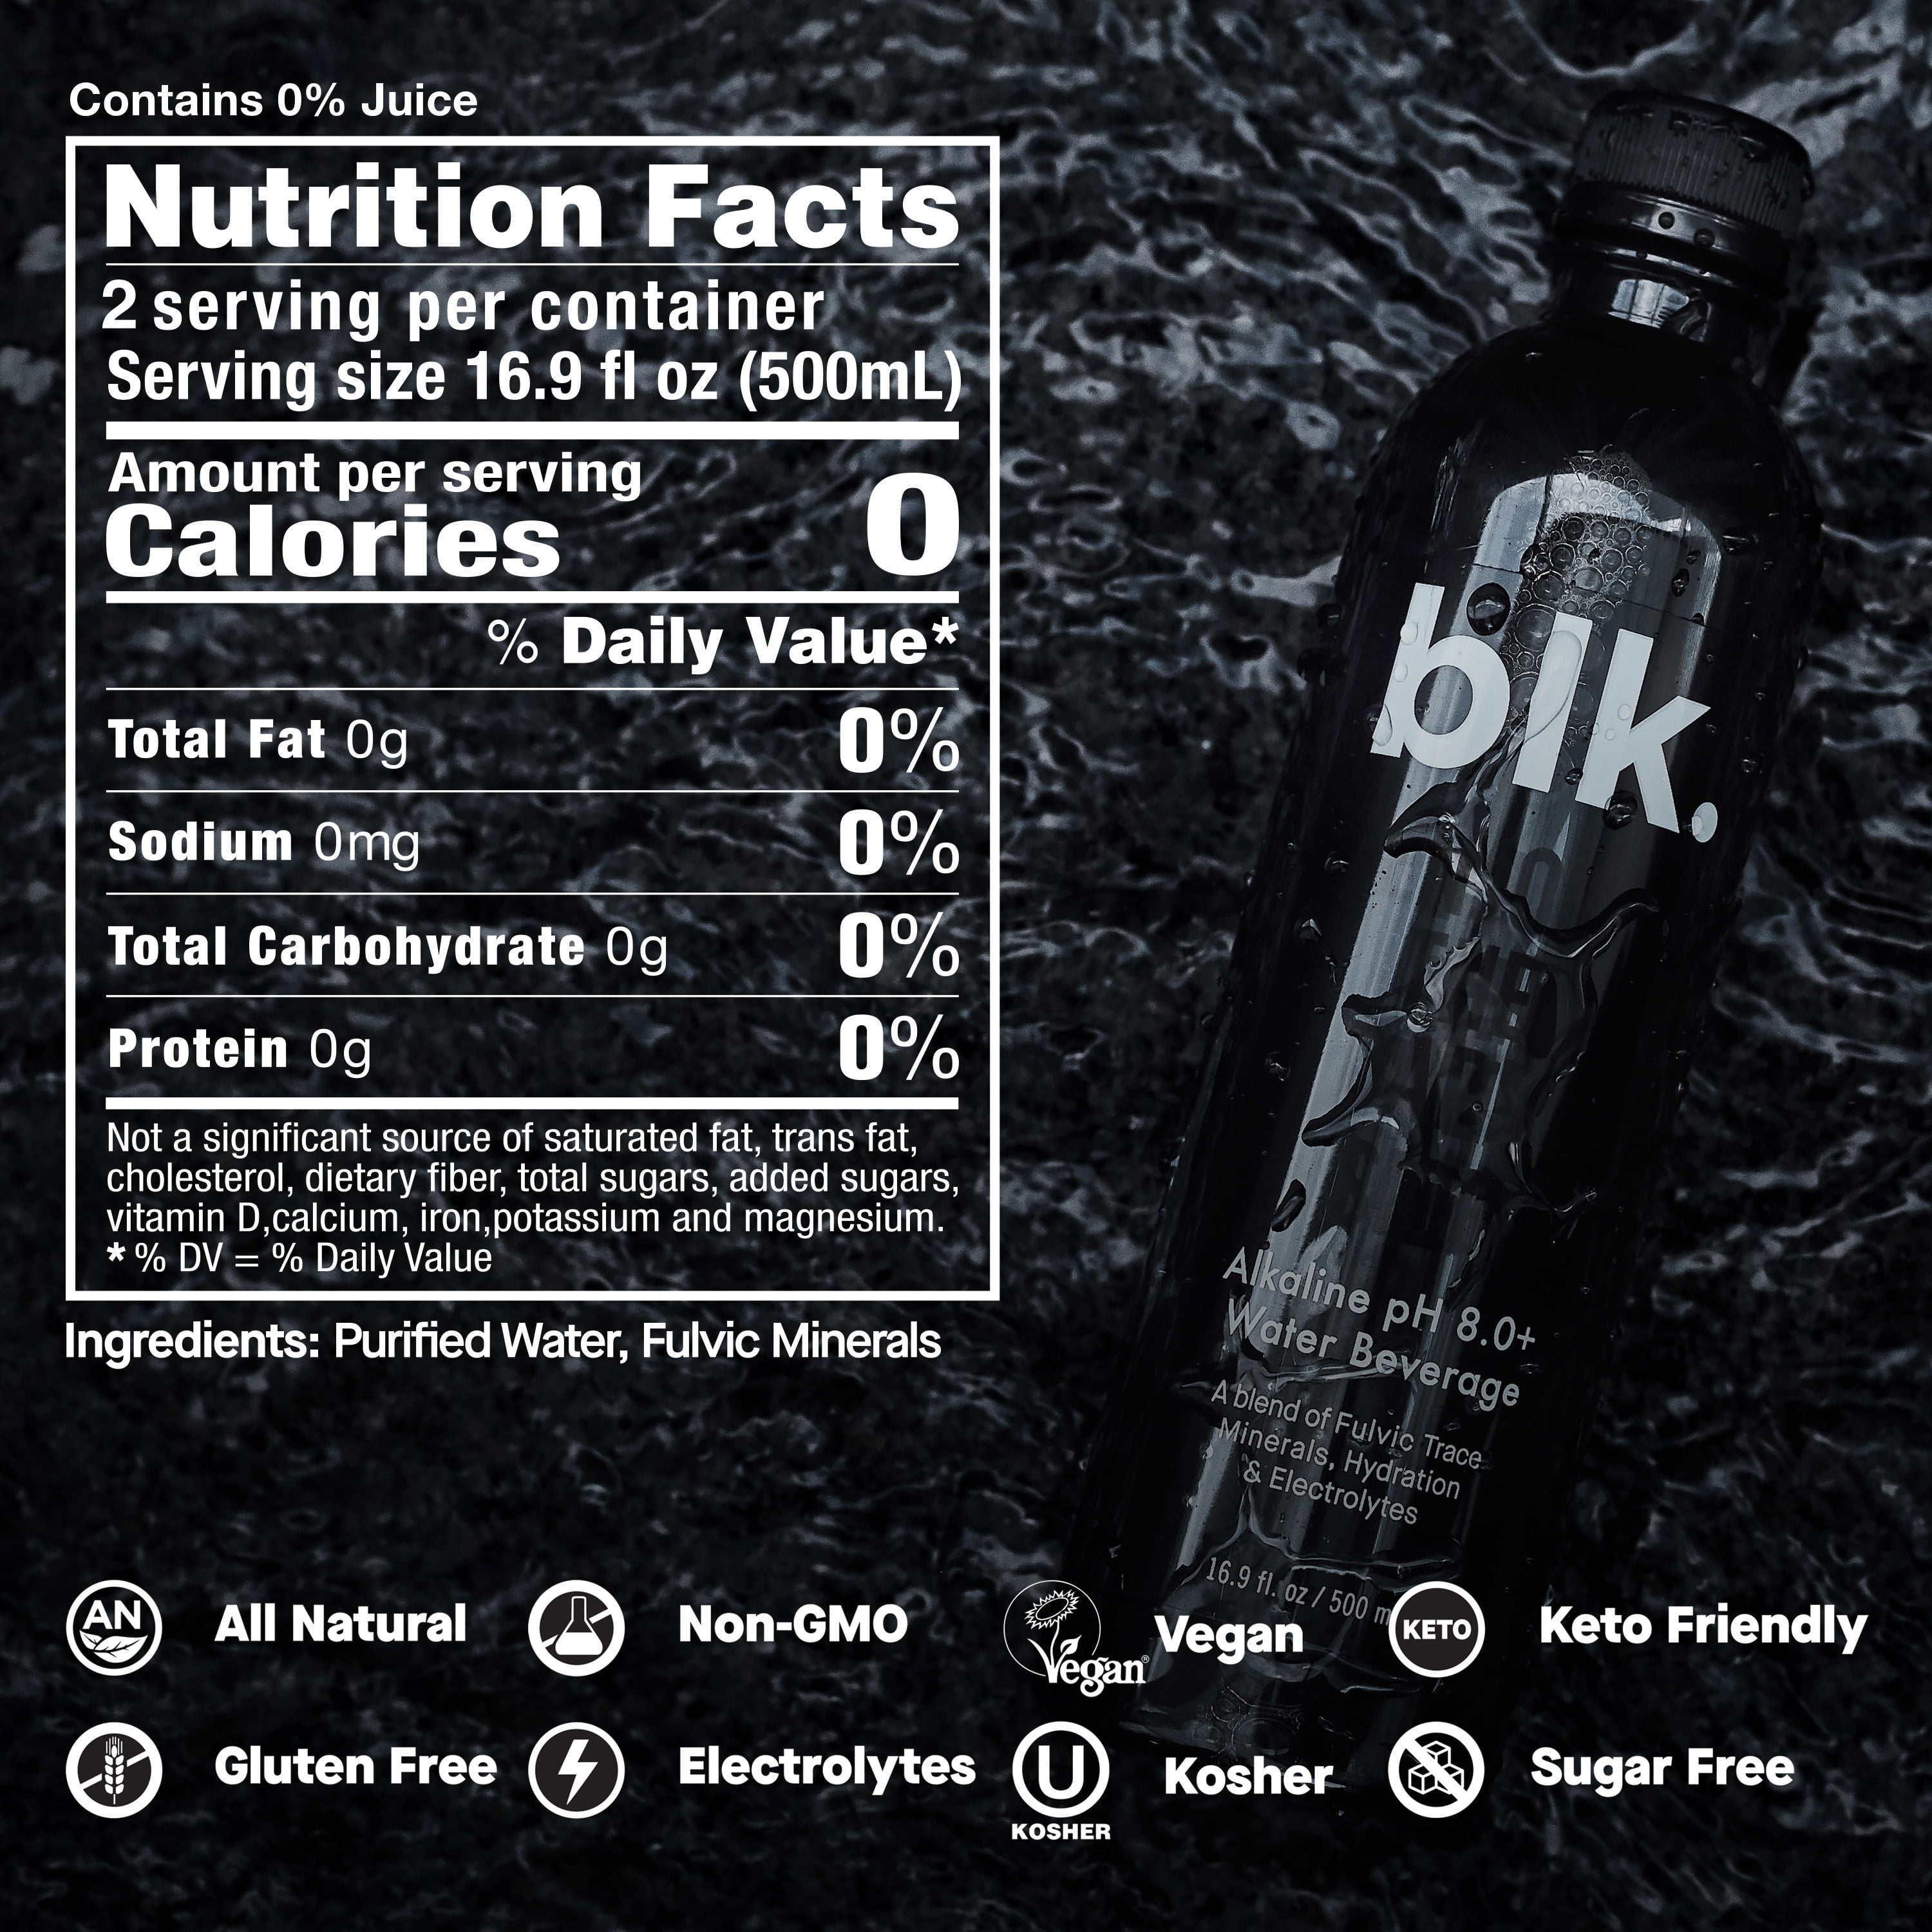 Wholesale blk. Water Original, 500mL 12 Pack, Bottles for your